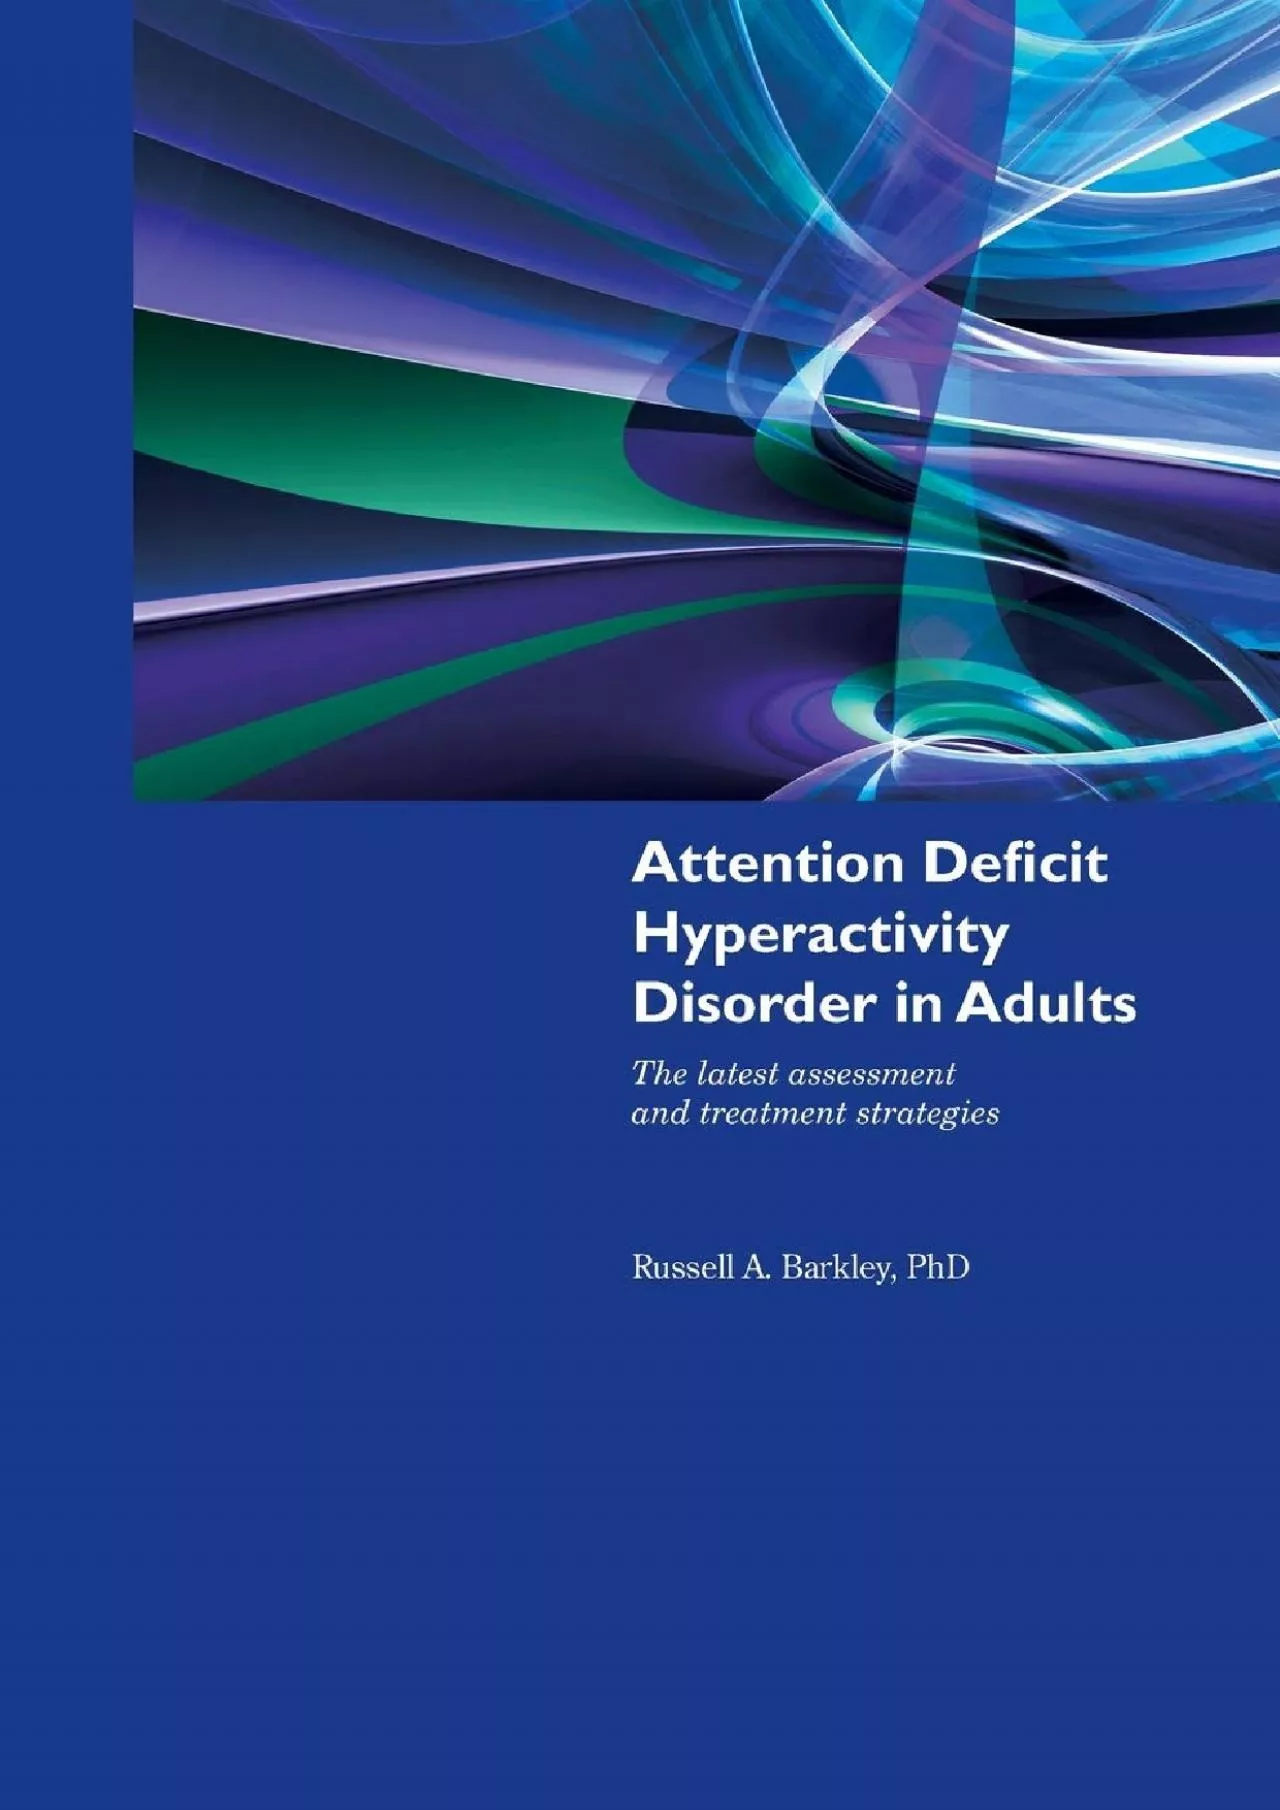 (BOOK)-Attention Deficit Hyperactivity Disorder in Adults